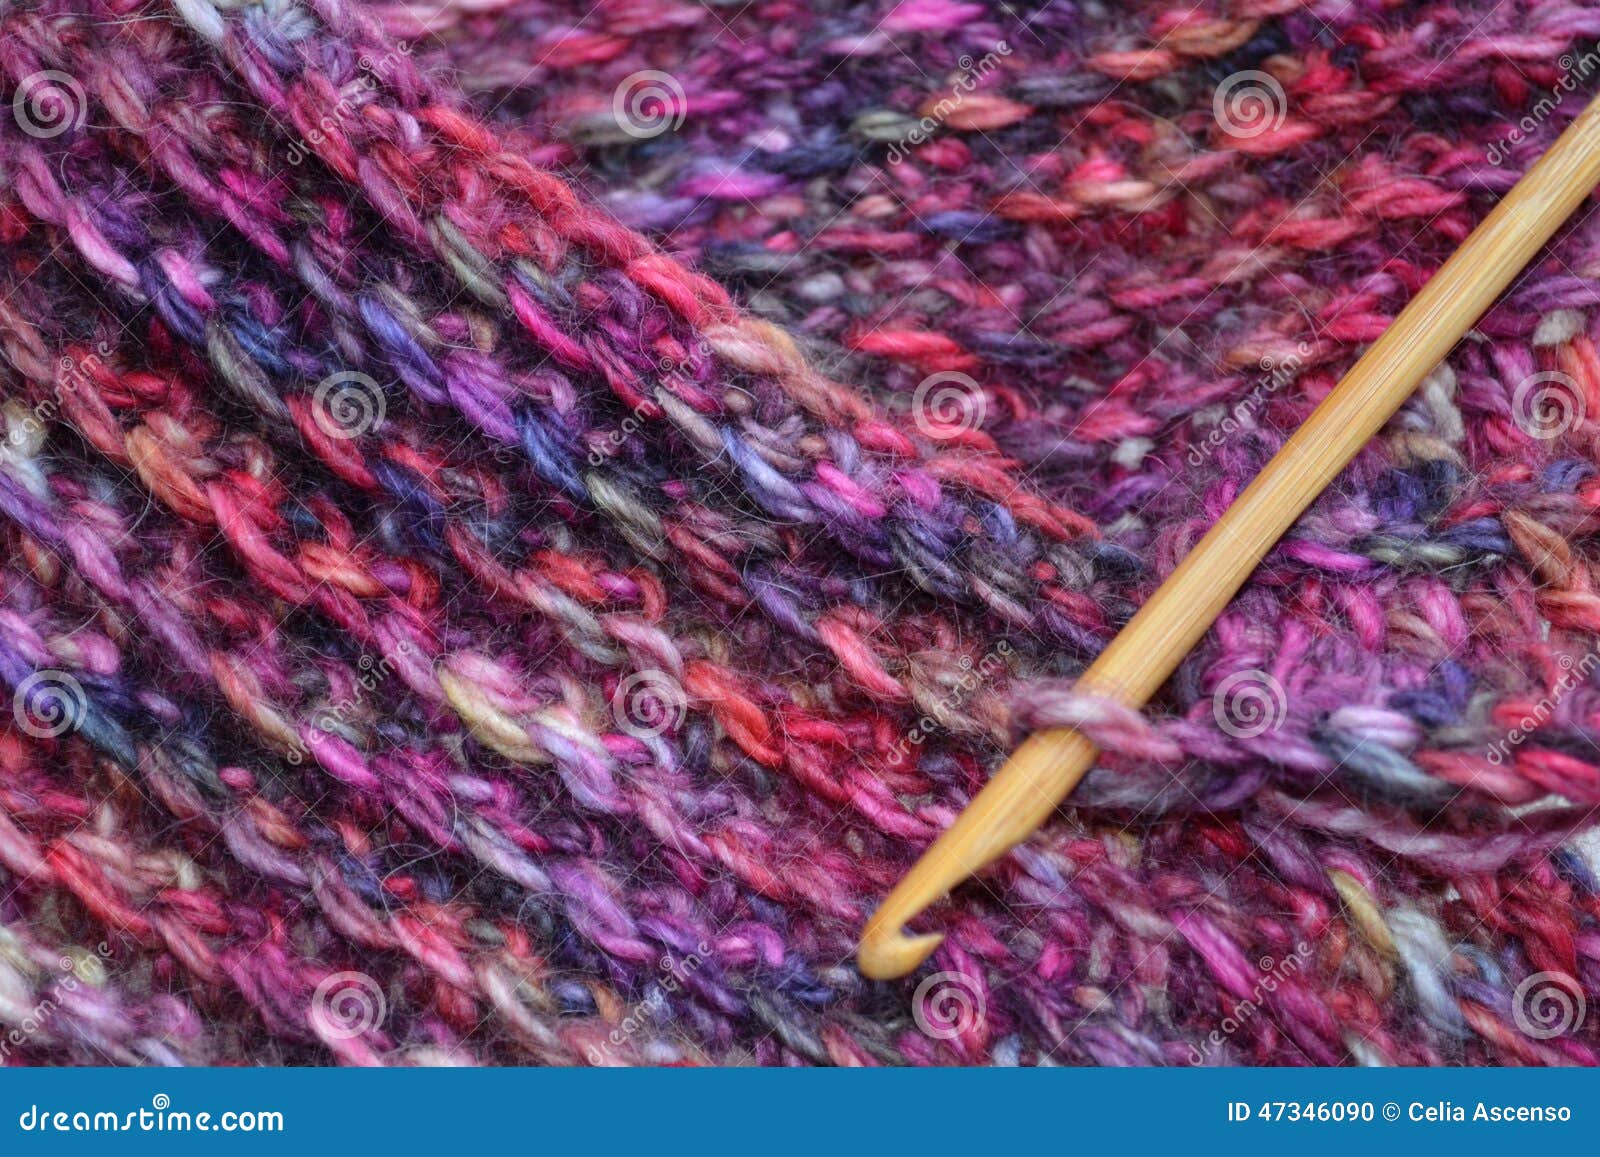 Crochet Hook and Fabric Background Stock Photo - Image of background ...